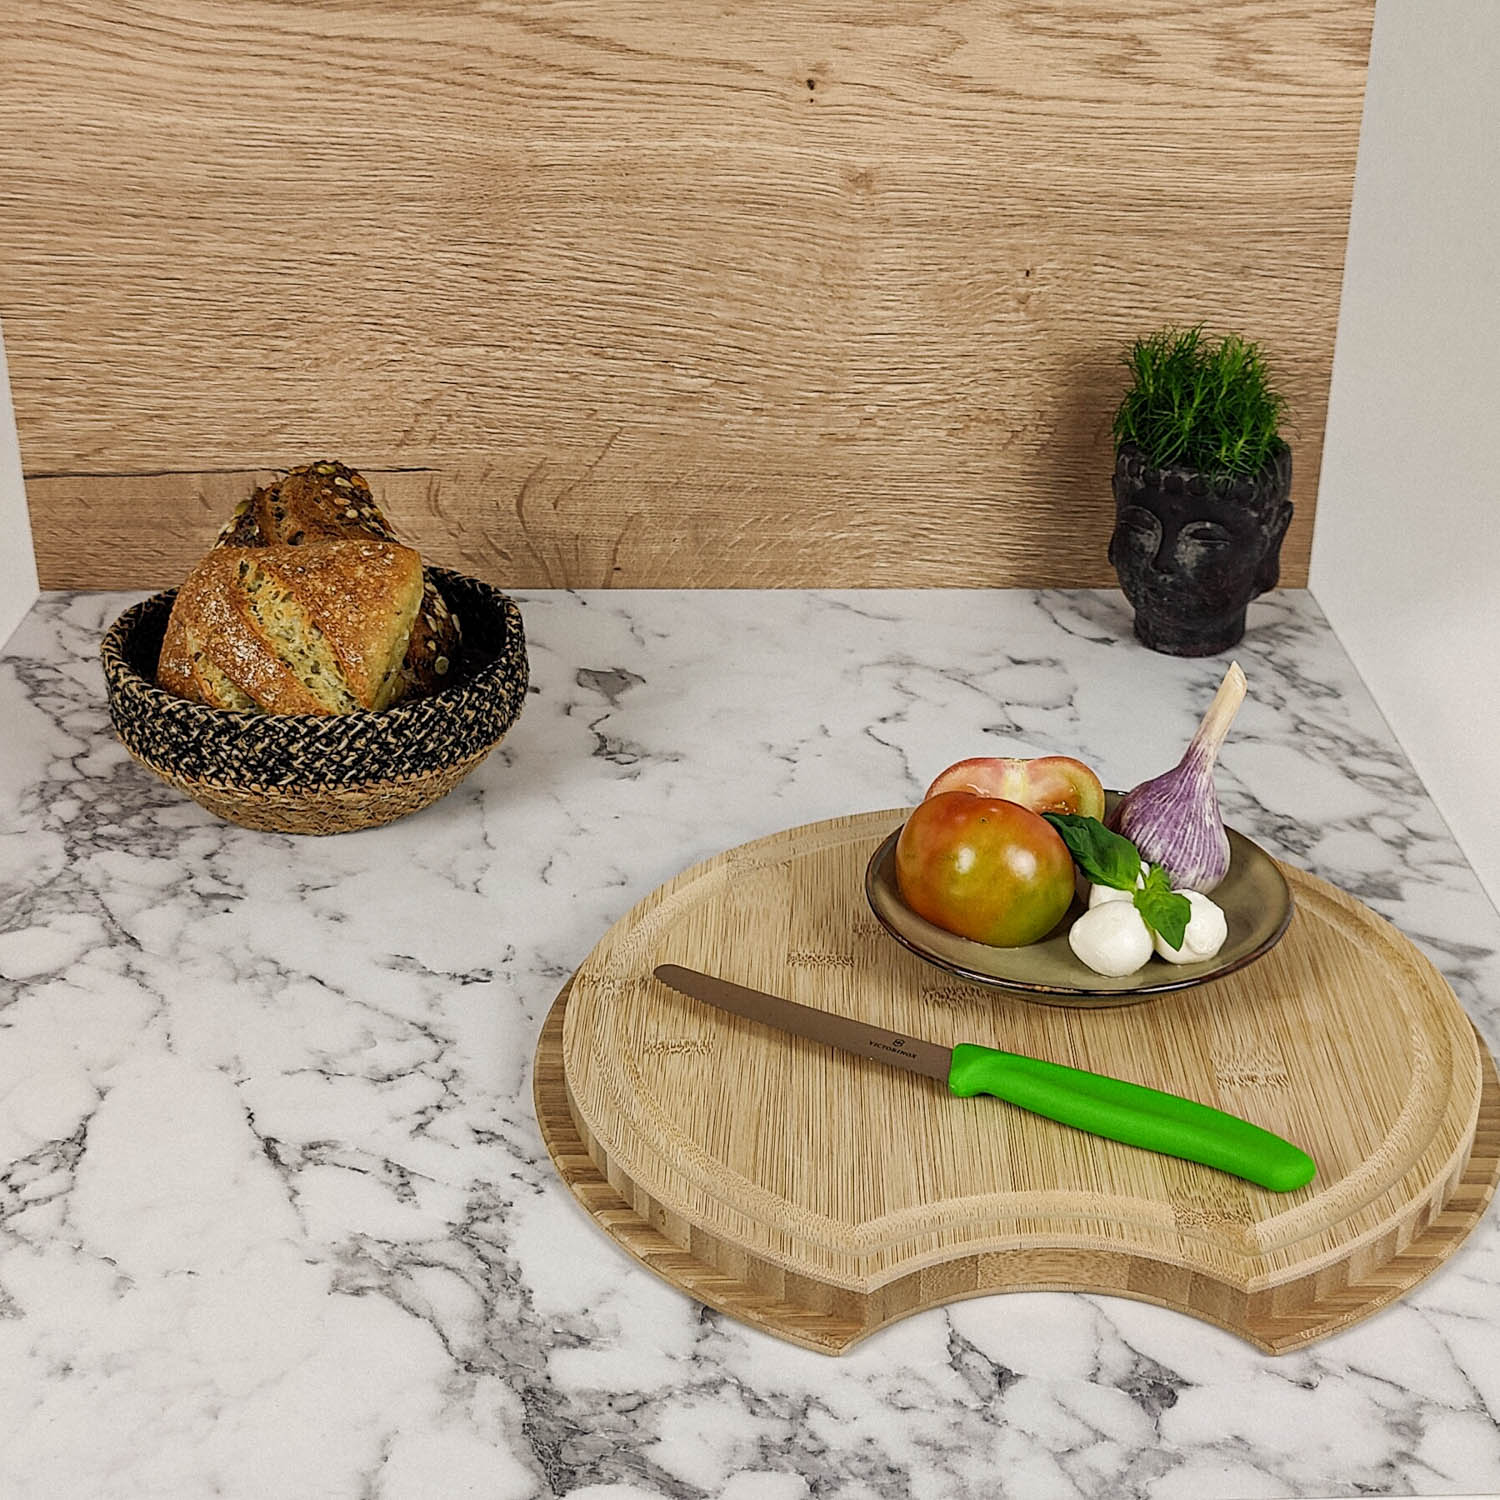 Cutting board with sink cover for LMC models